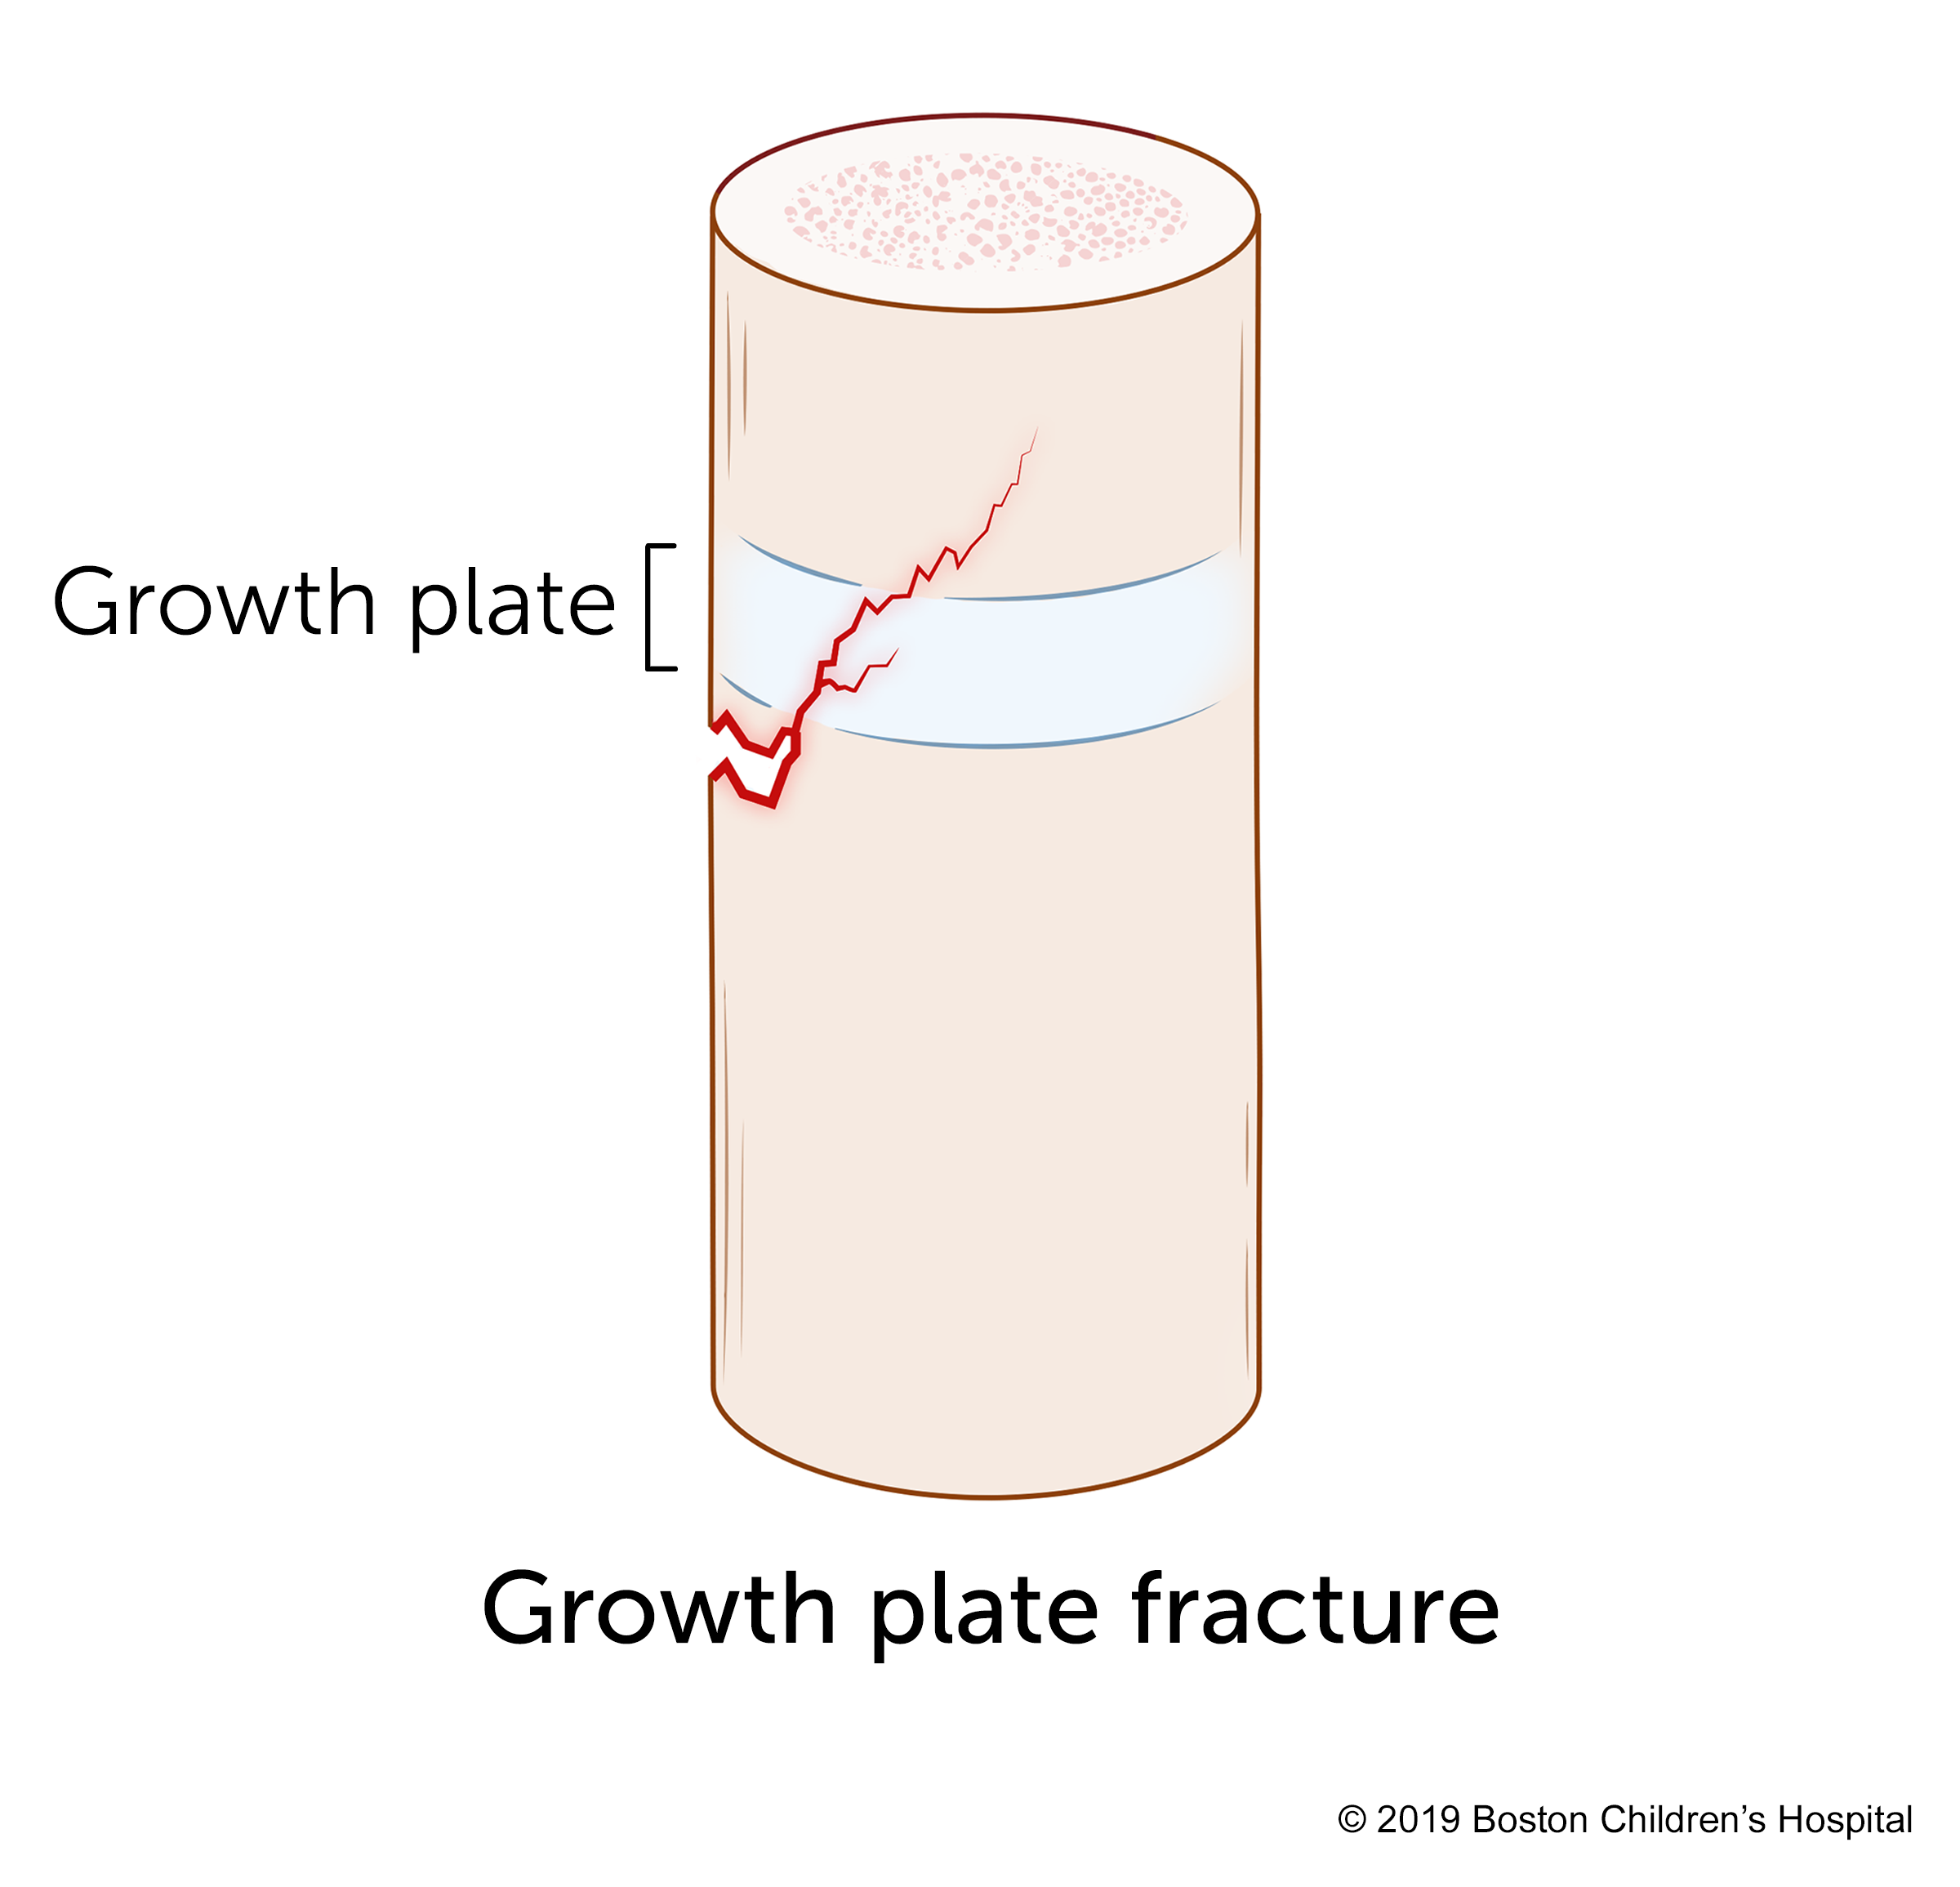 An illustration of a growth plate fracture